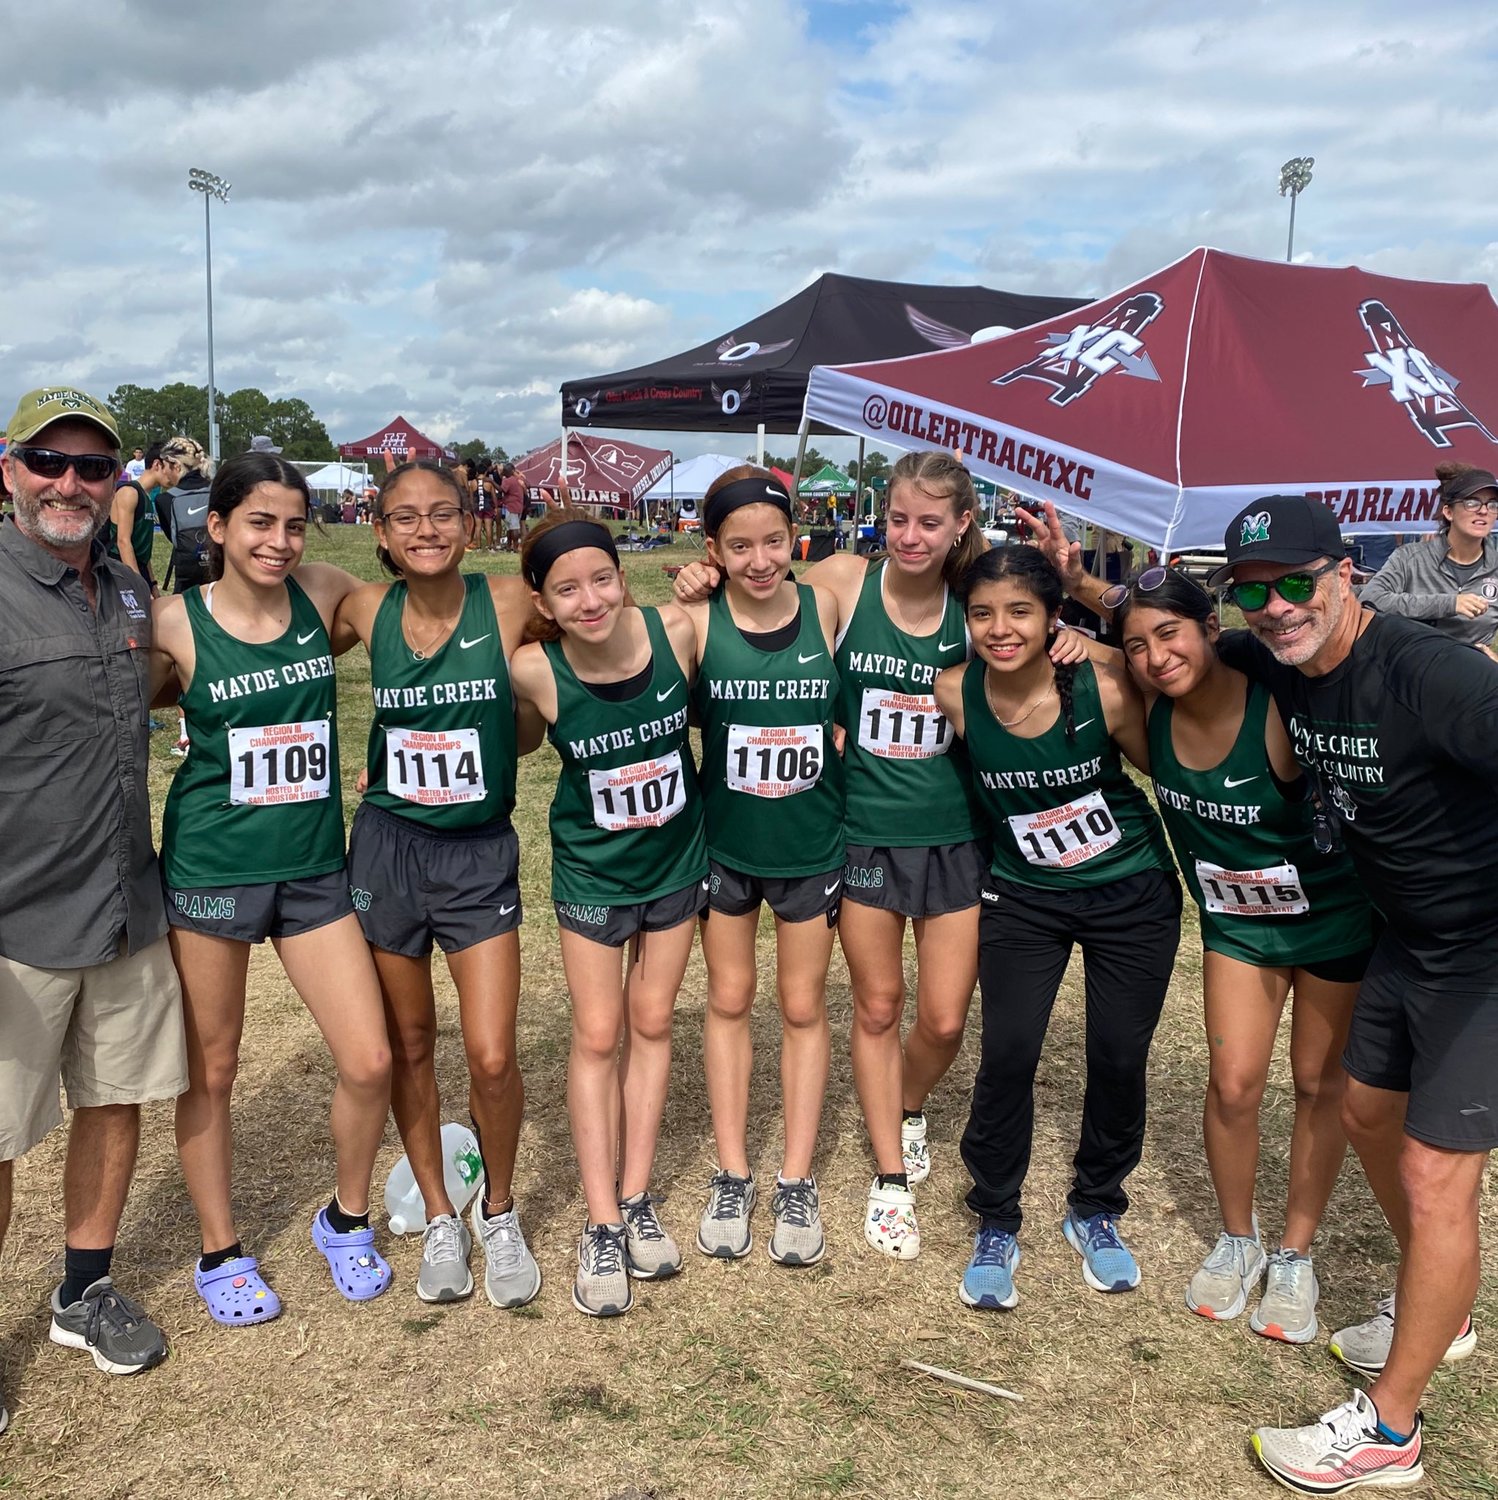 The Mayde Creek girls team had three individuals qualify for the state meet.